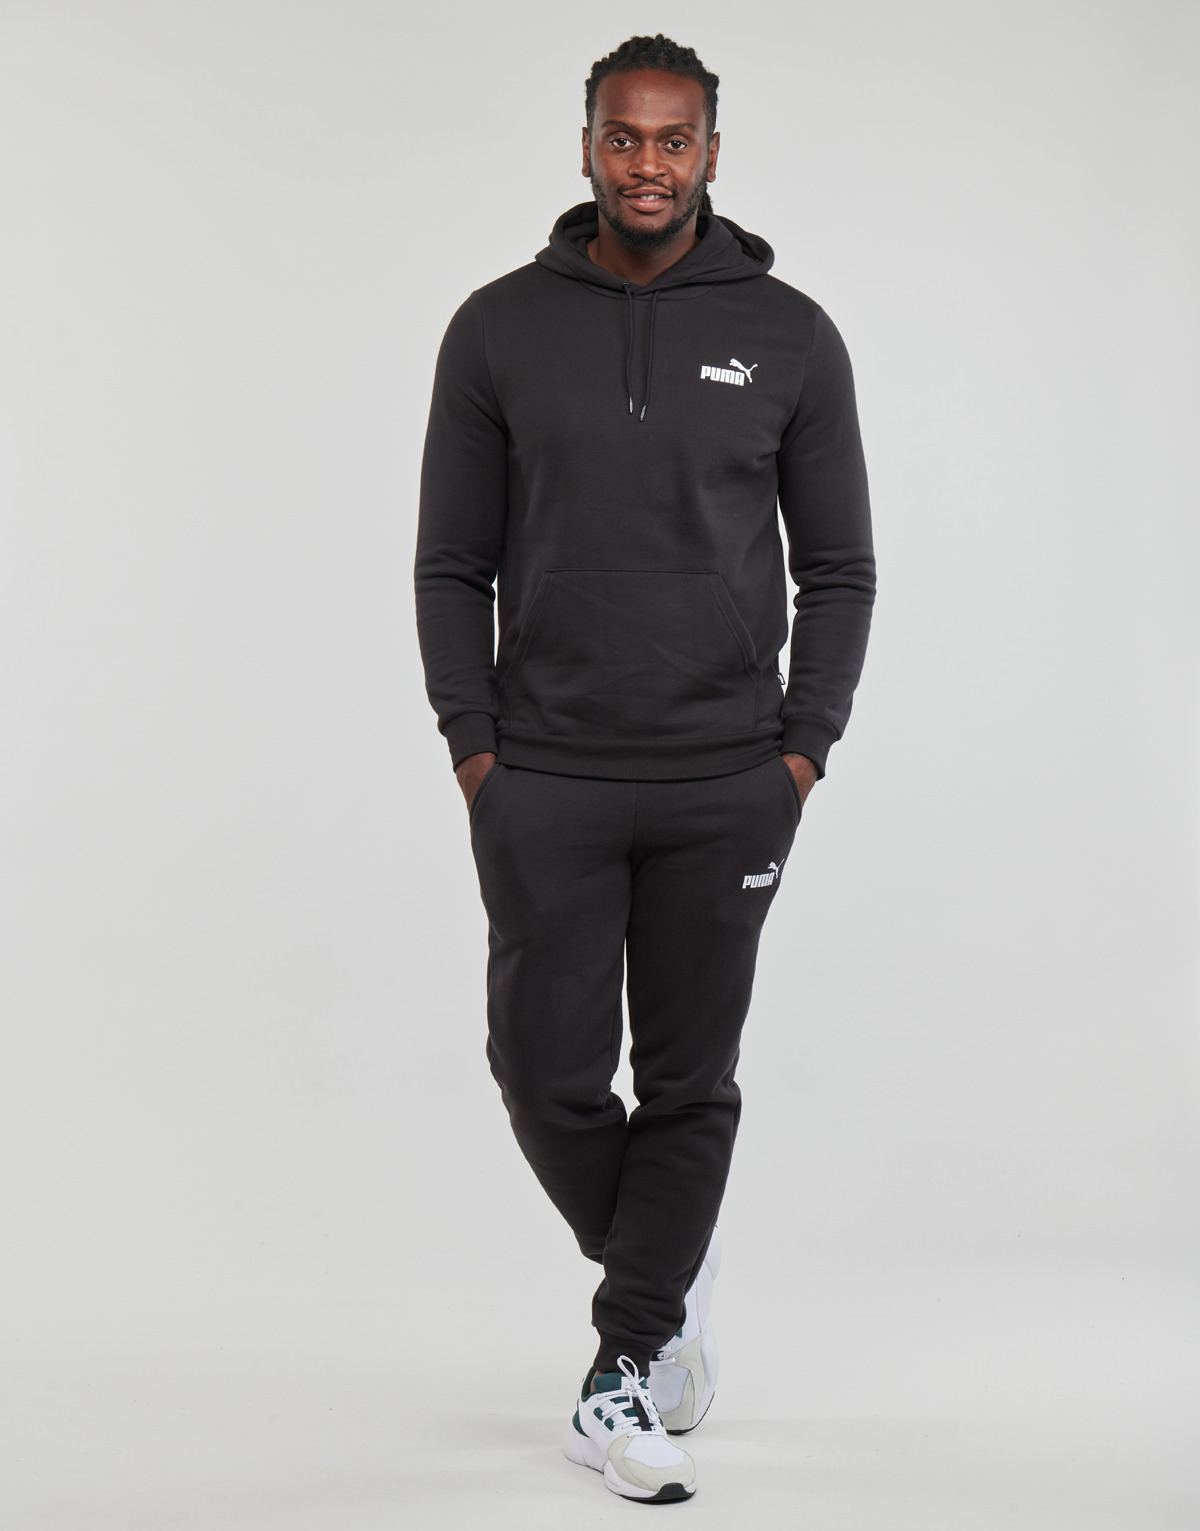 Puma FEEL GOOD HOODED SWEAT SUIT FL CL Black - Fast delivery